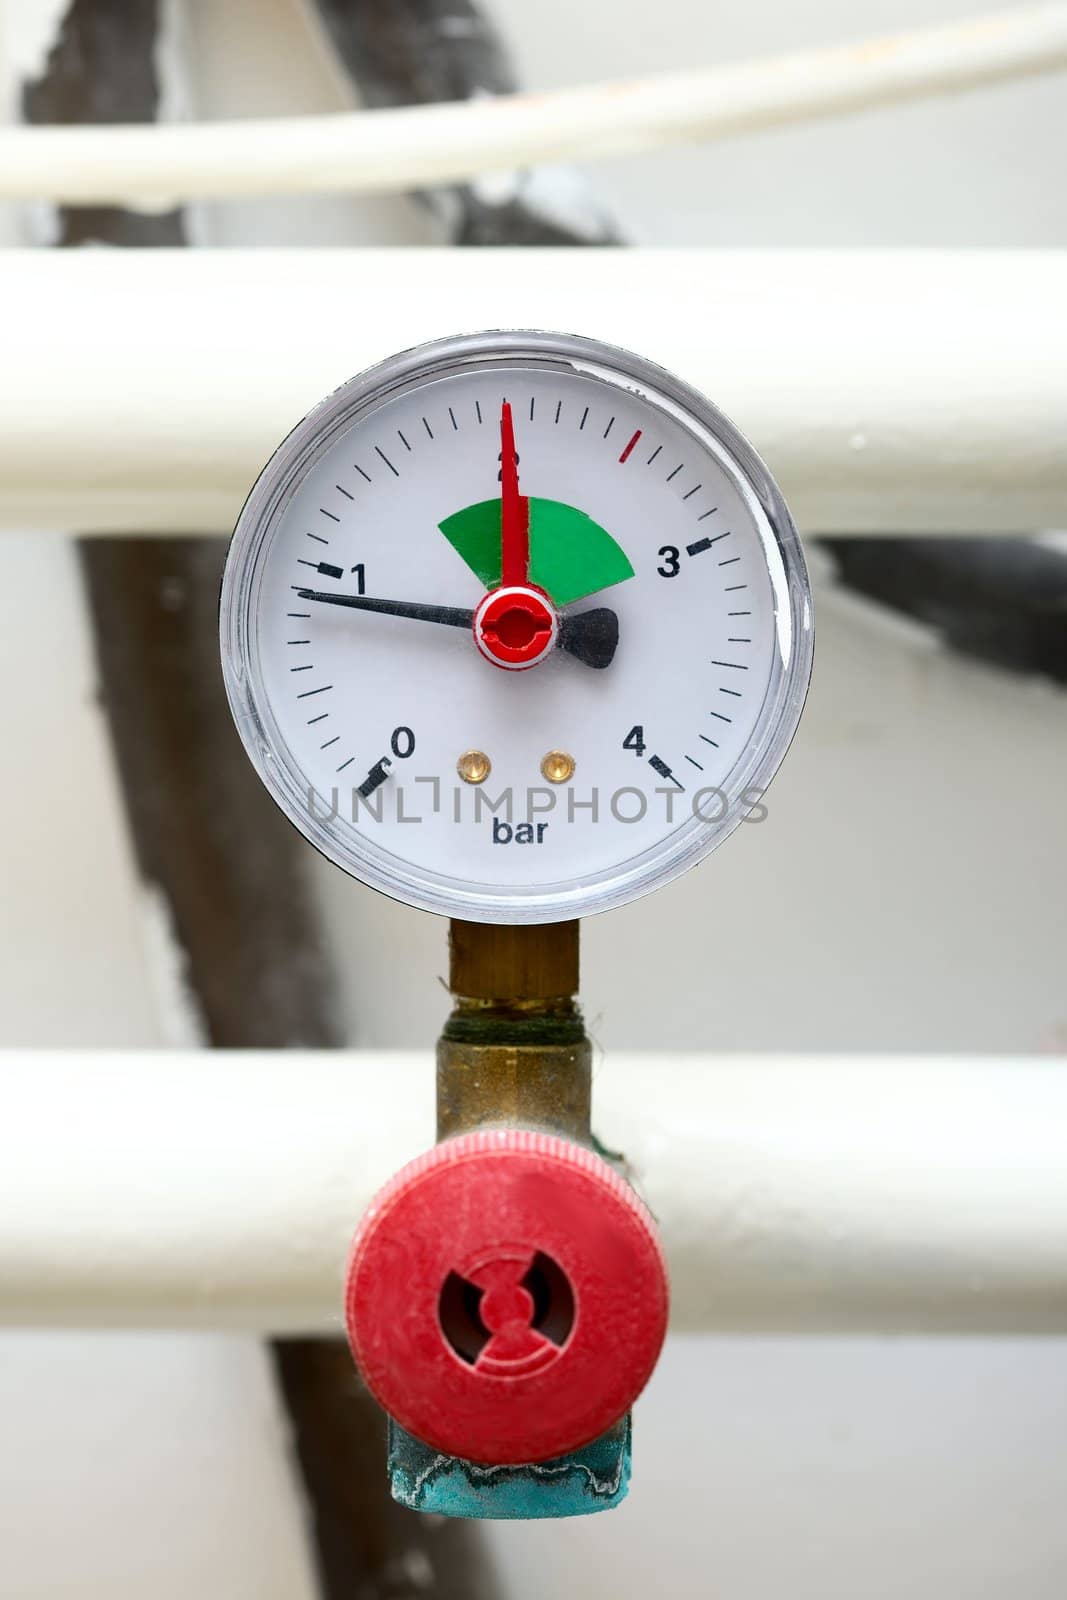 Simple pressure meter o a pipe system